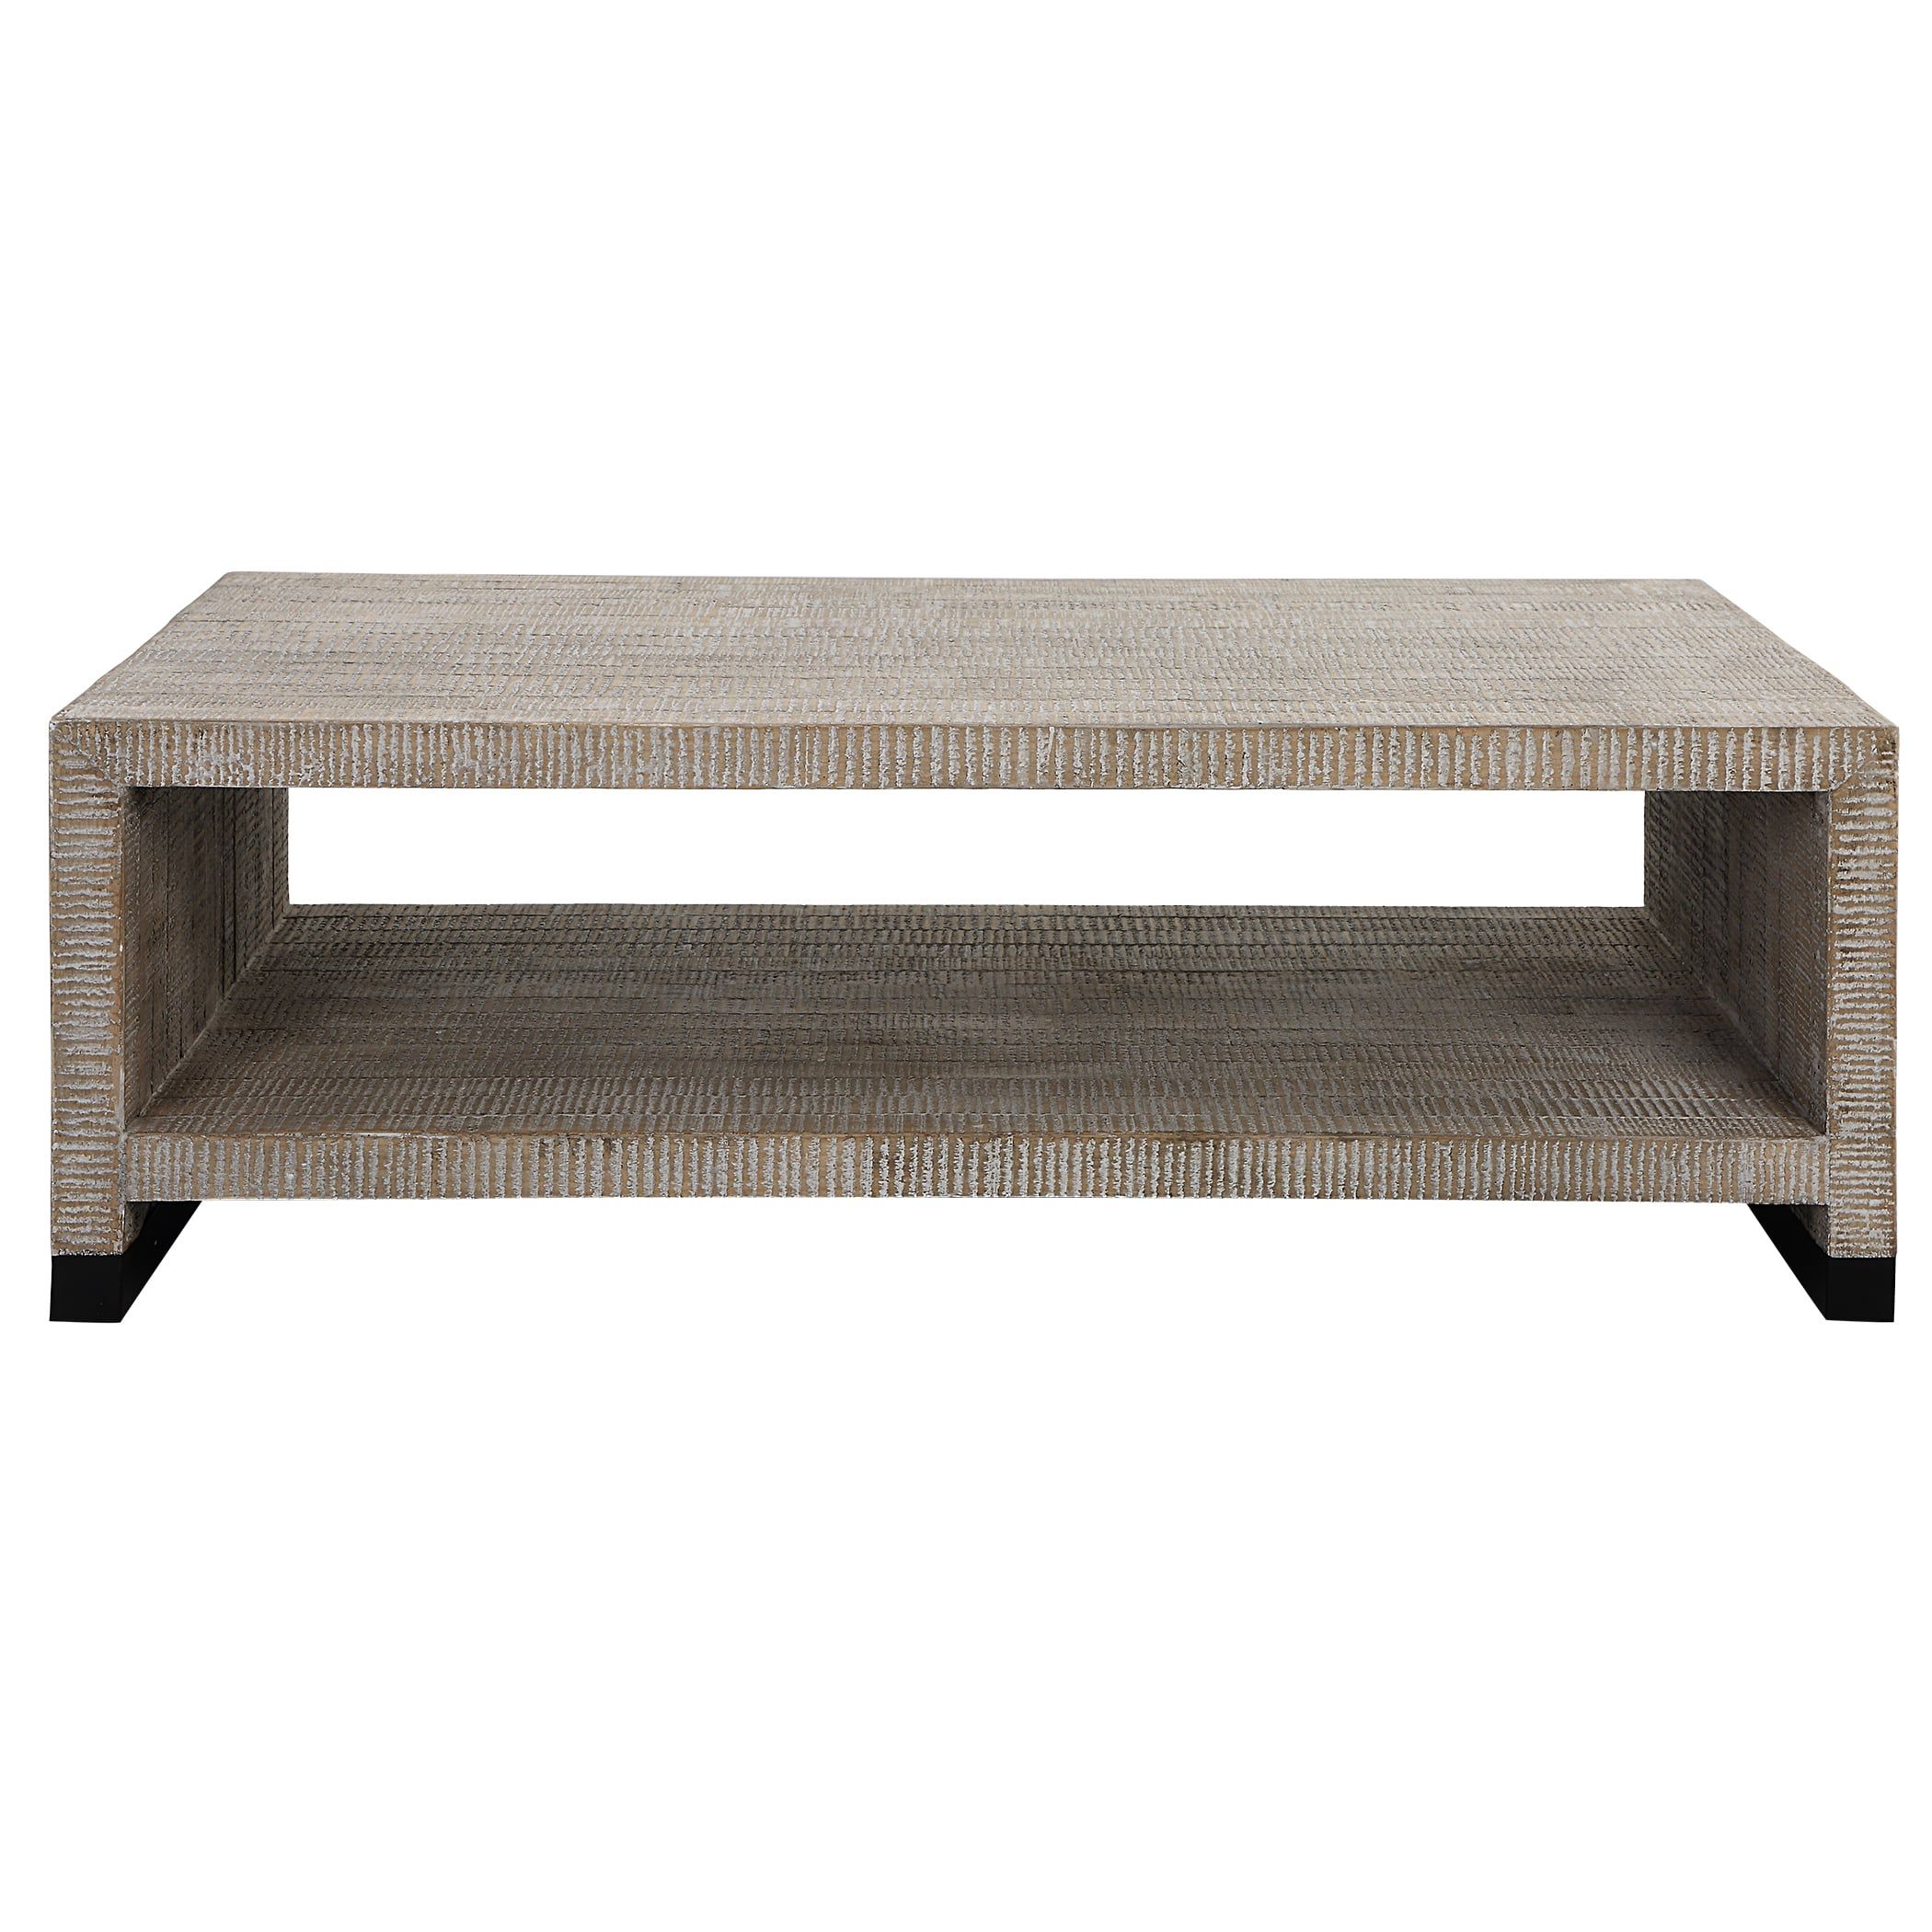 Uttermost Bosk Rustic White Washed Coffee Table With Open Shelving With Regard To Coffee Tables With Open Storage Shelves (View 7 of 20)